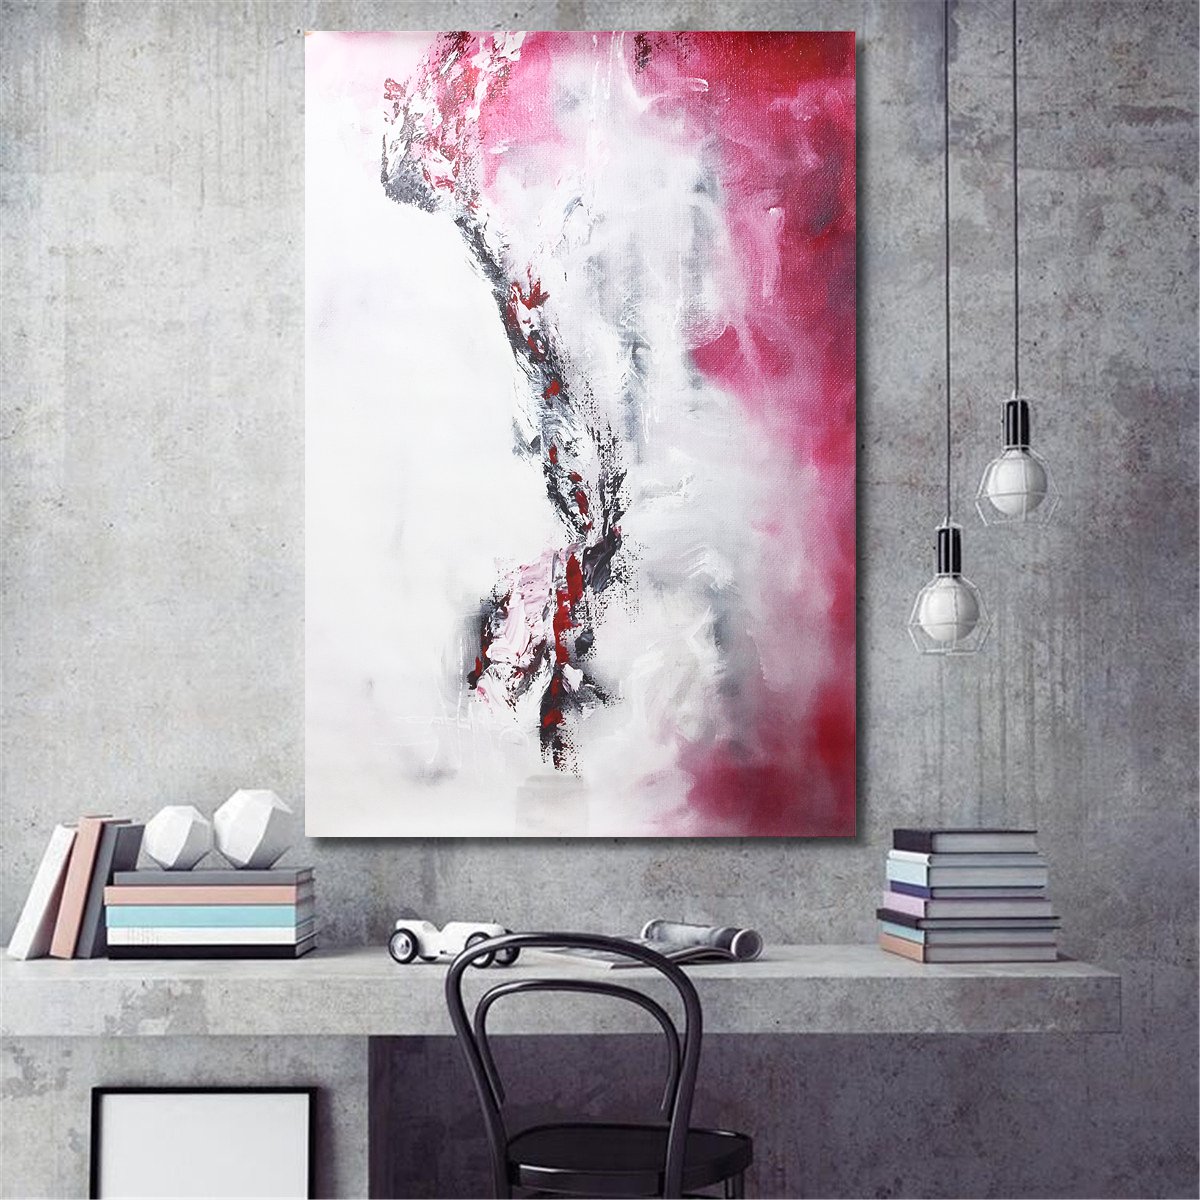 Modern-Abstract-Canvas-Oil-Print-Paintings-Home-Wall-Poster-Decor-Unframed-1344557-6